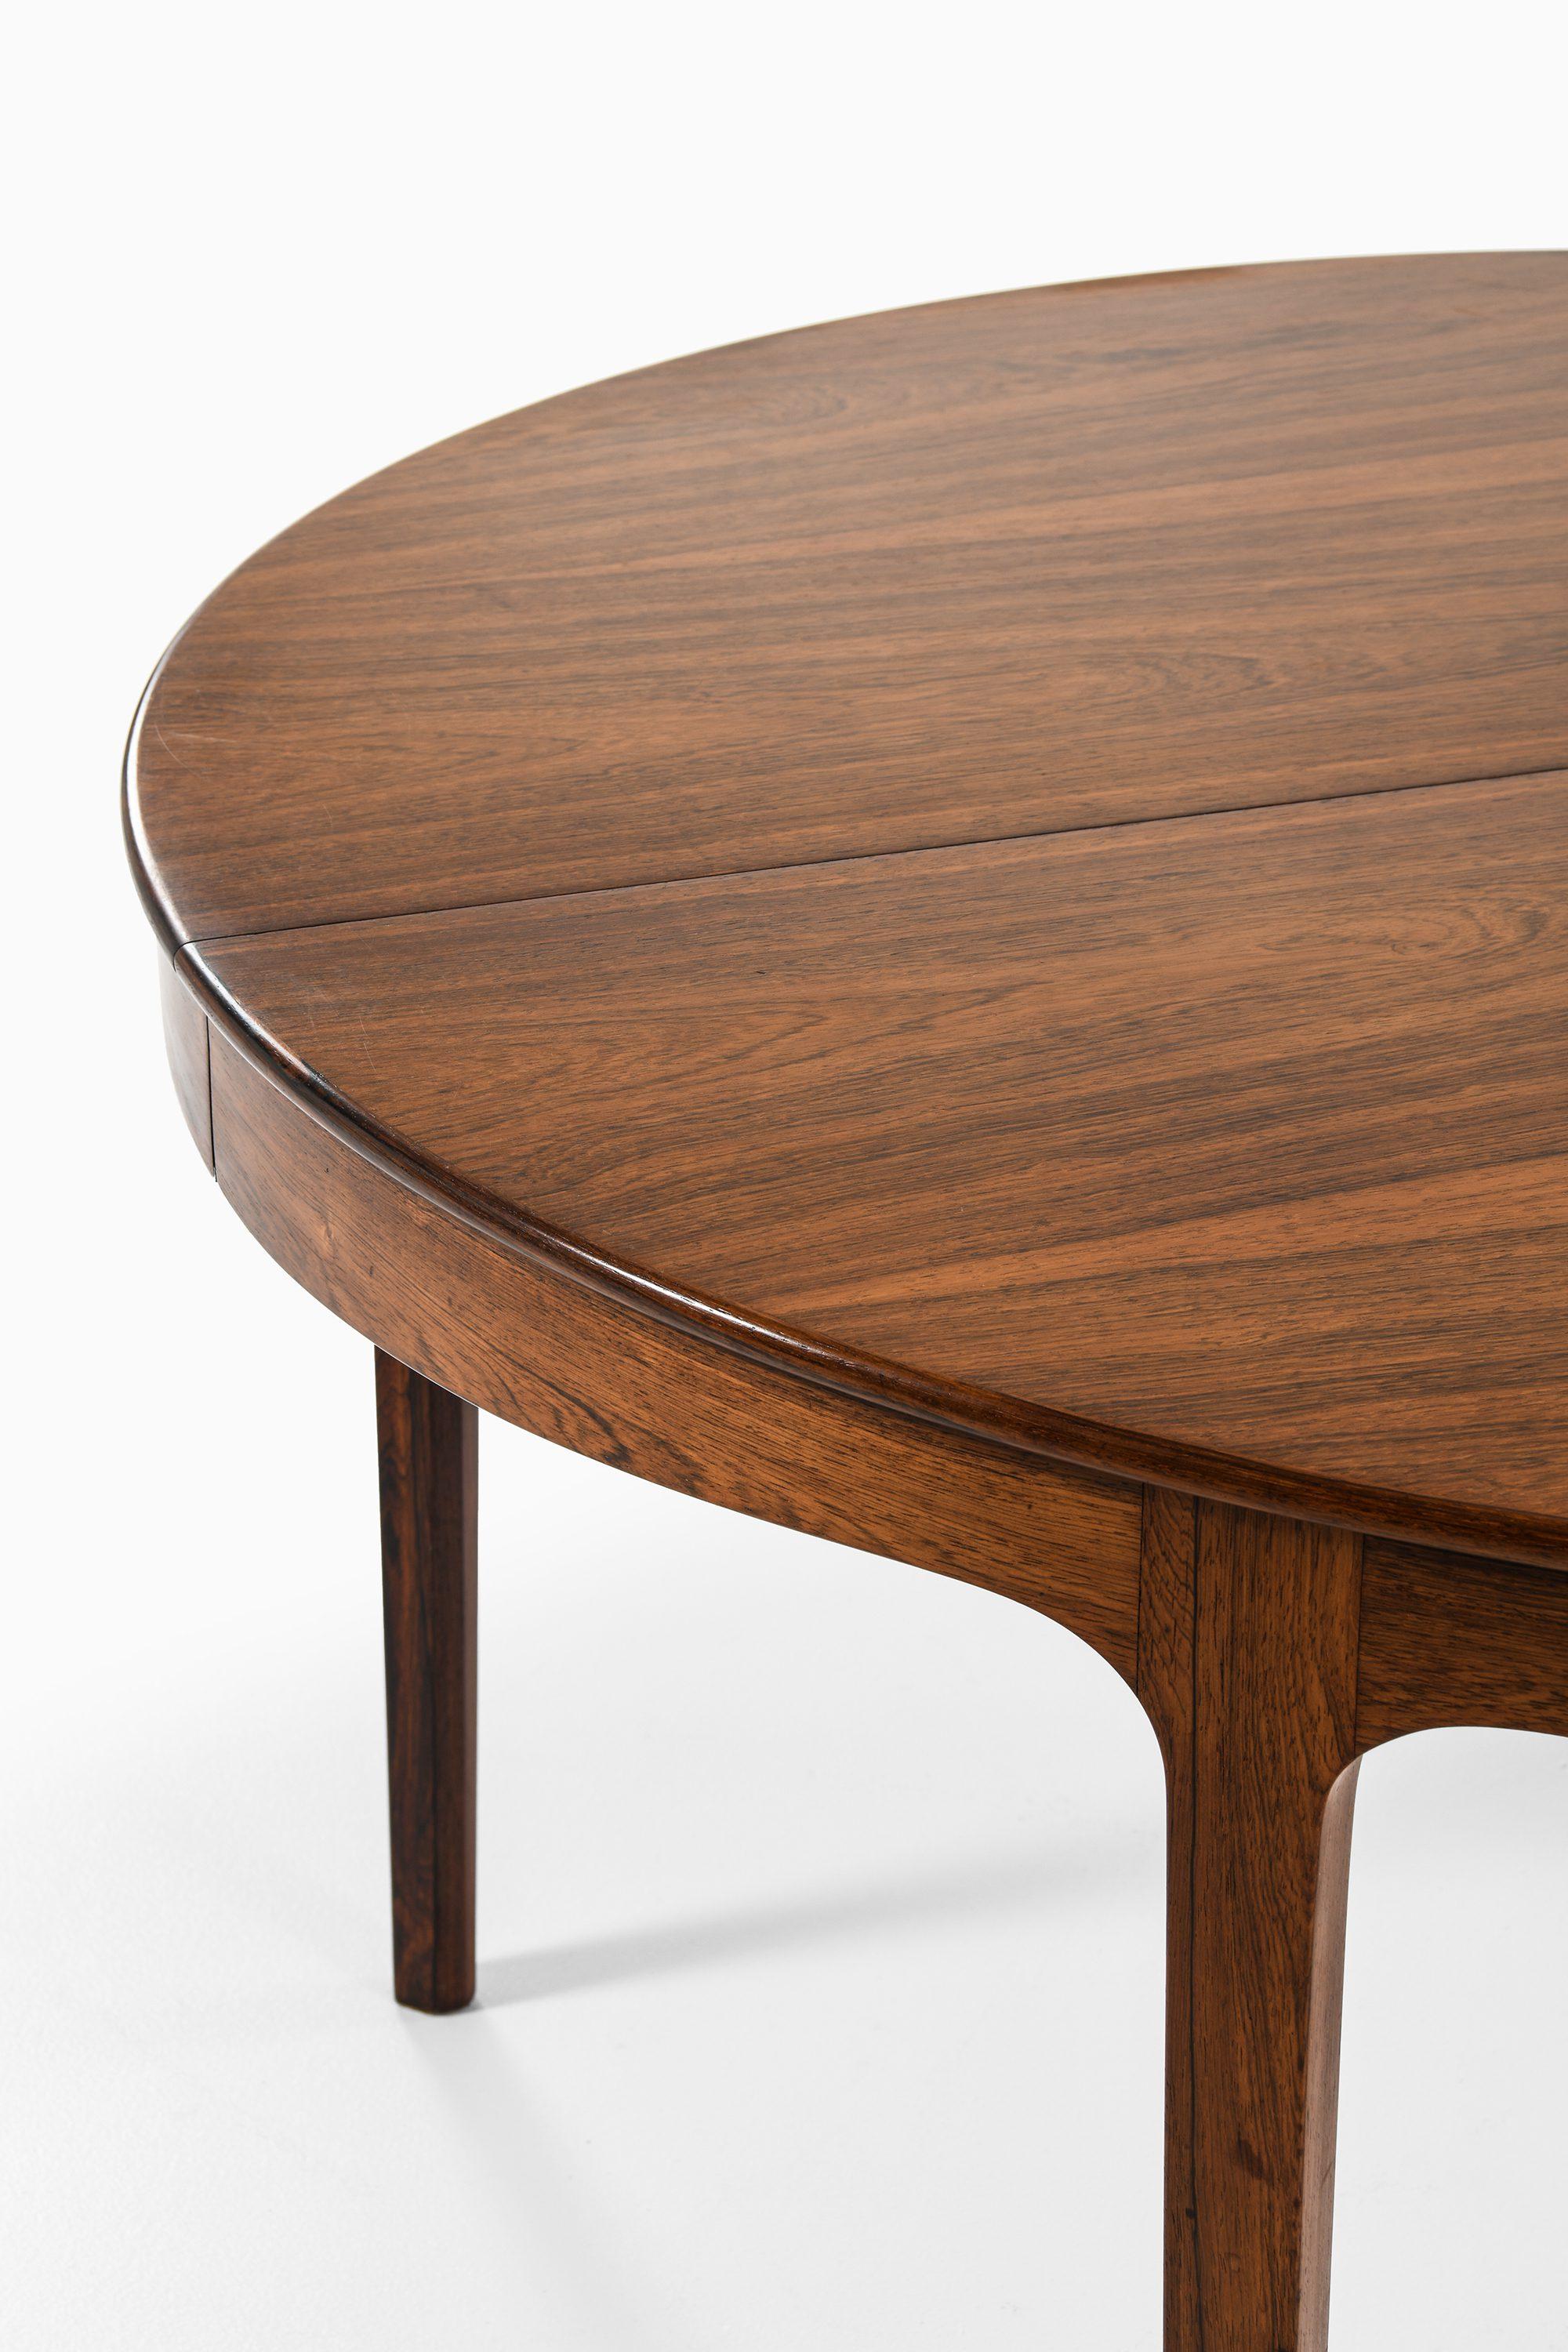 20th Century Dining Table in Rosewood by Ole Wanscher, 1945 For Sale